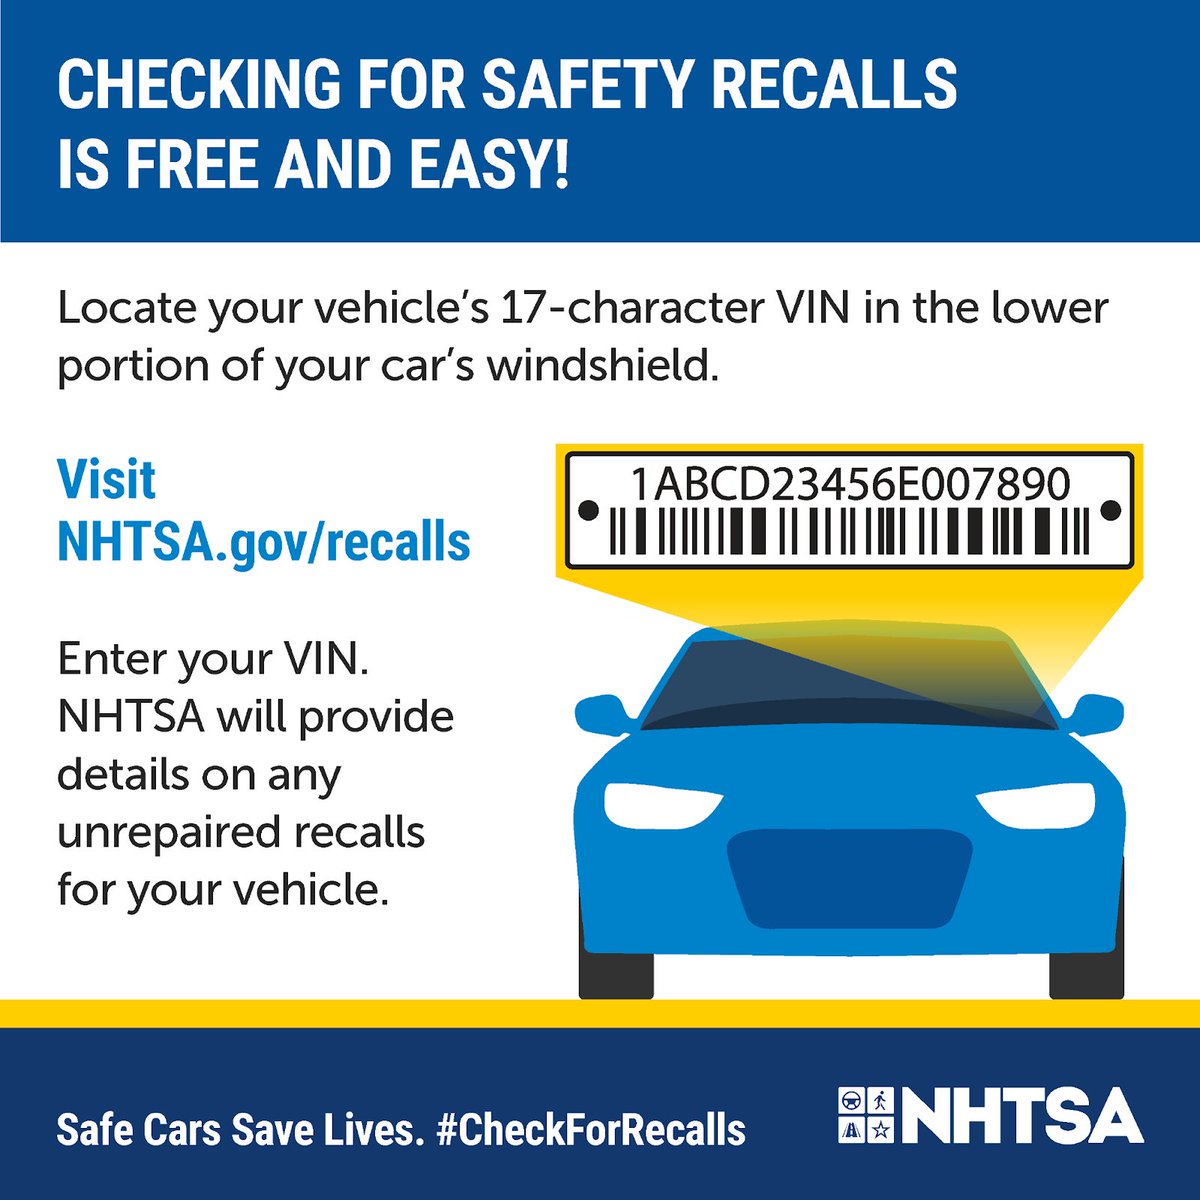 If you have a used vehicle, you may not be receiving your vehicle’s recall notices. This is why it is important to take the initiative, check for yourself. Use NHTSA’s VIN lookup tool at nhtsa.gov/recalls to check your vehicle for recalls. #CheckForRecalls